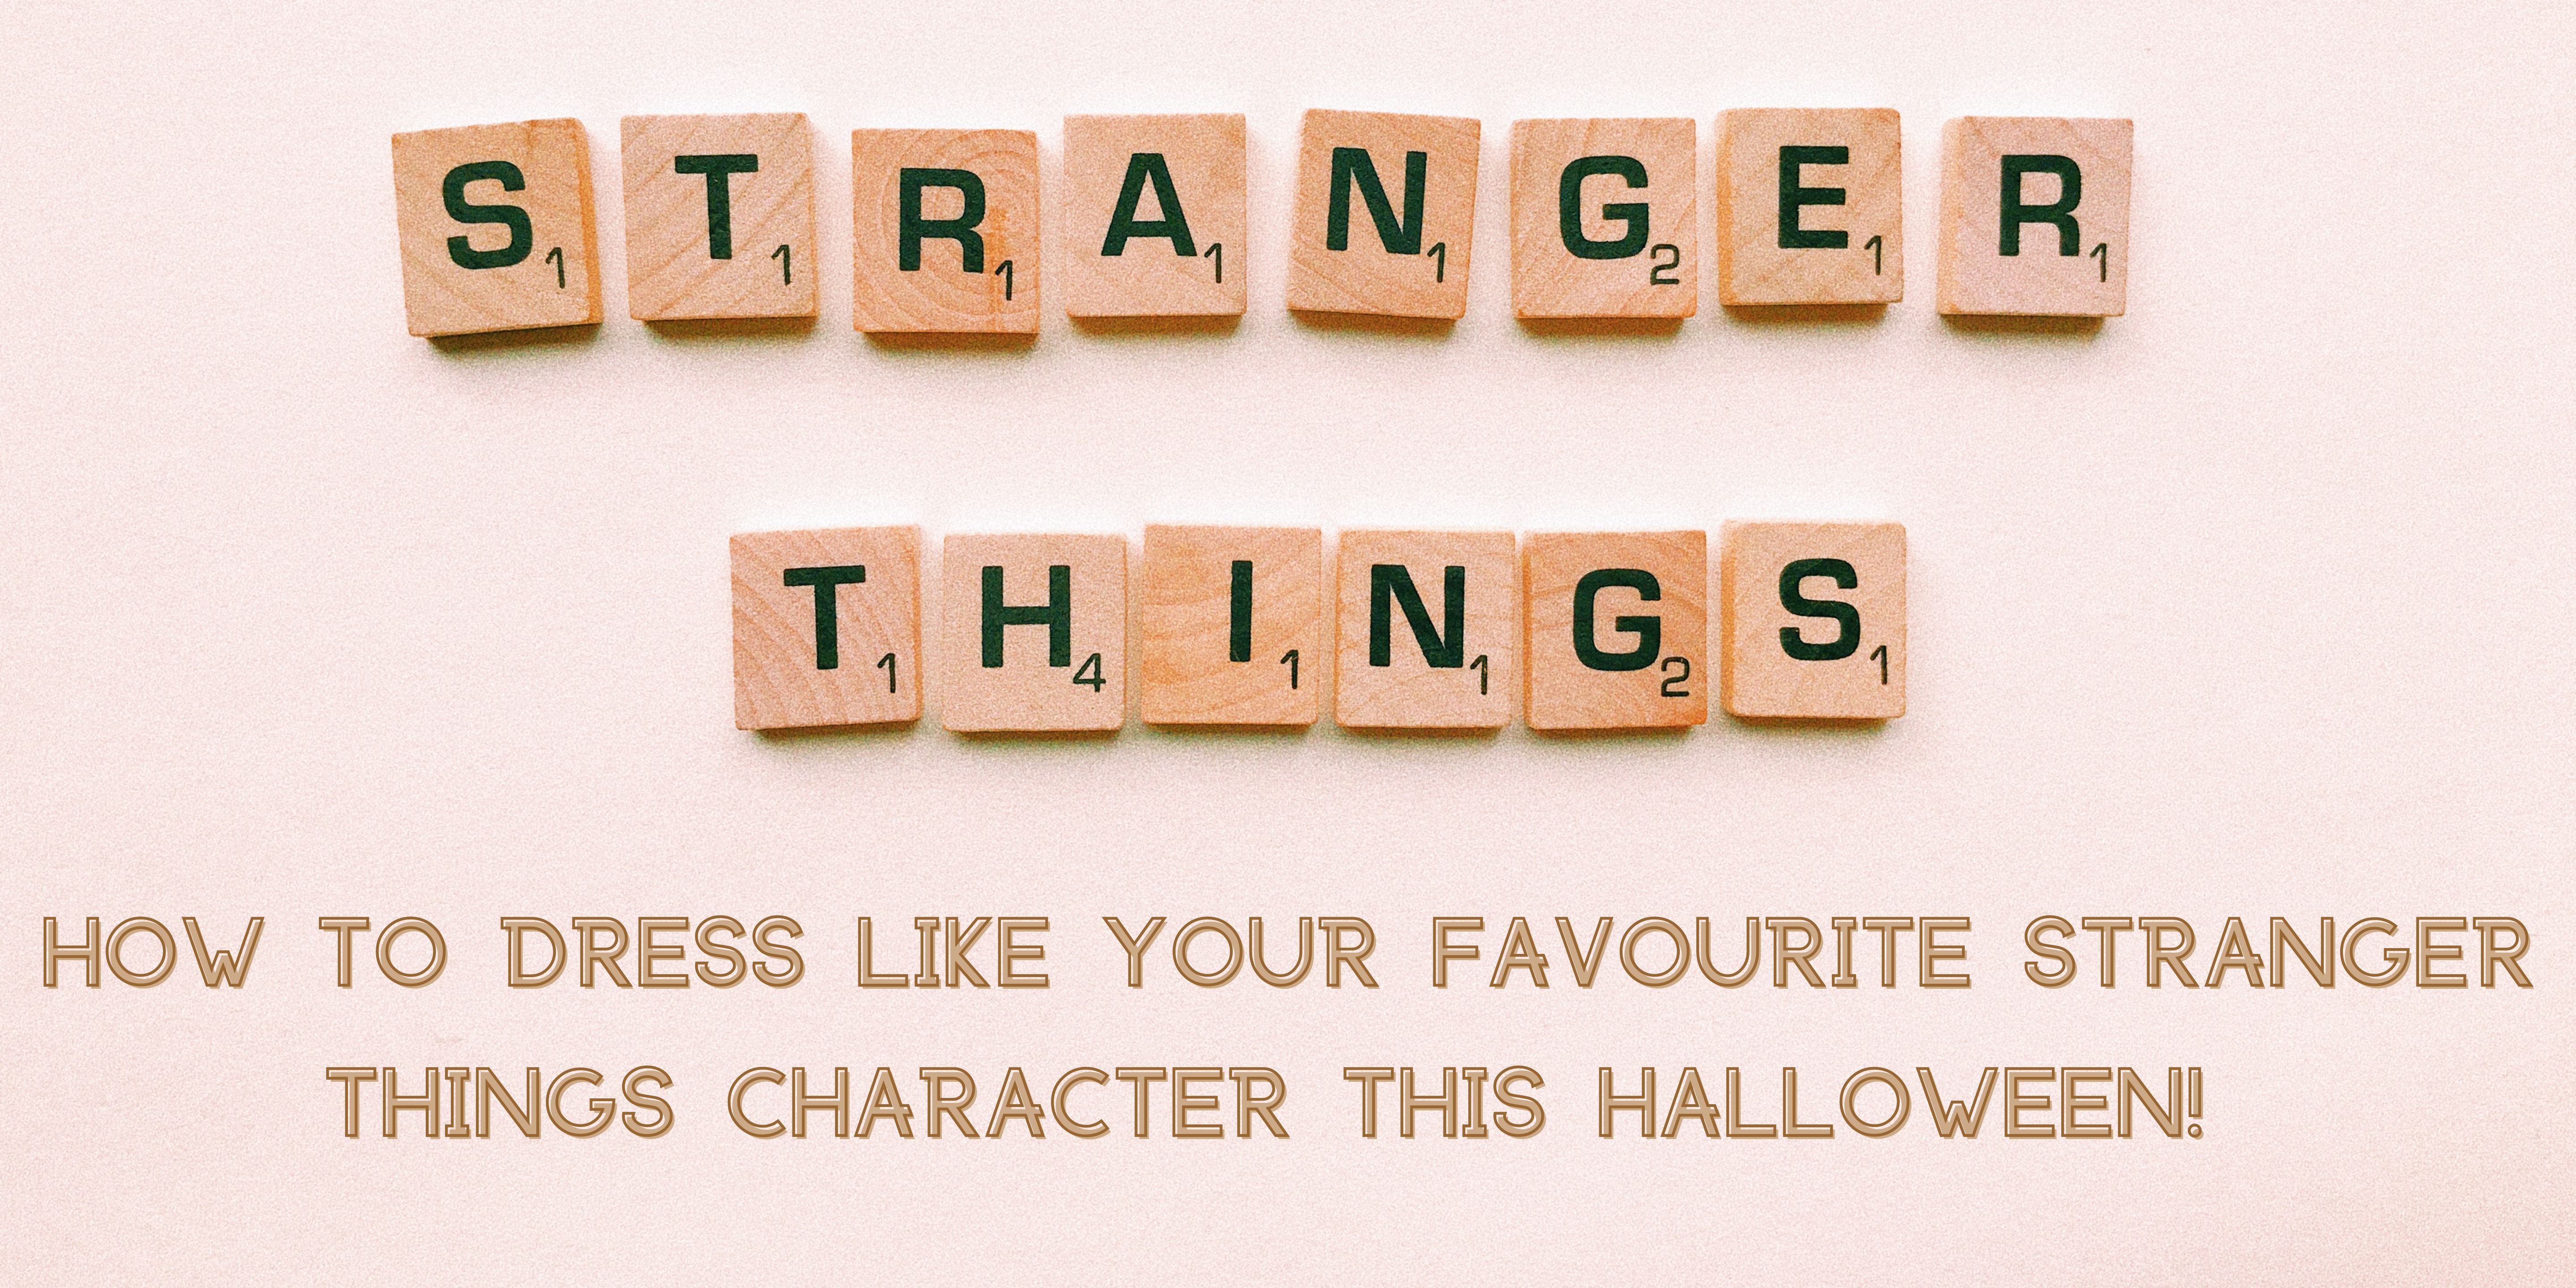 How To Dress Like Your Favourite Stranger Things Character this Halloween?